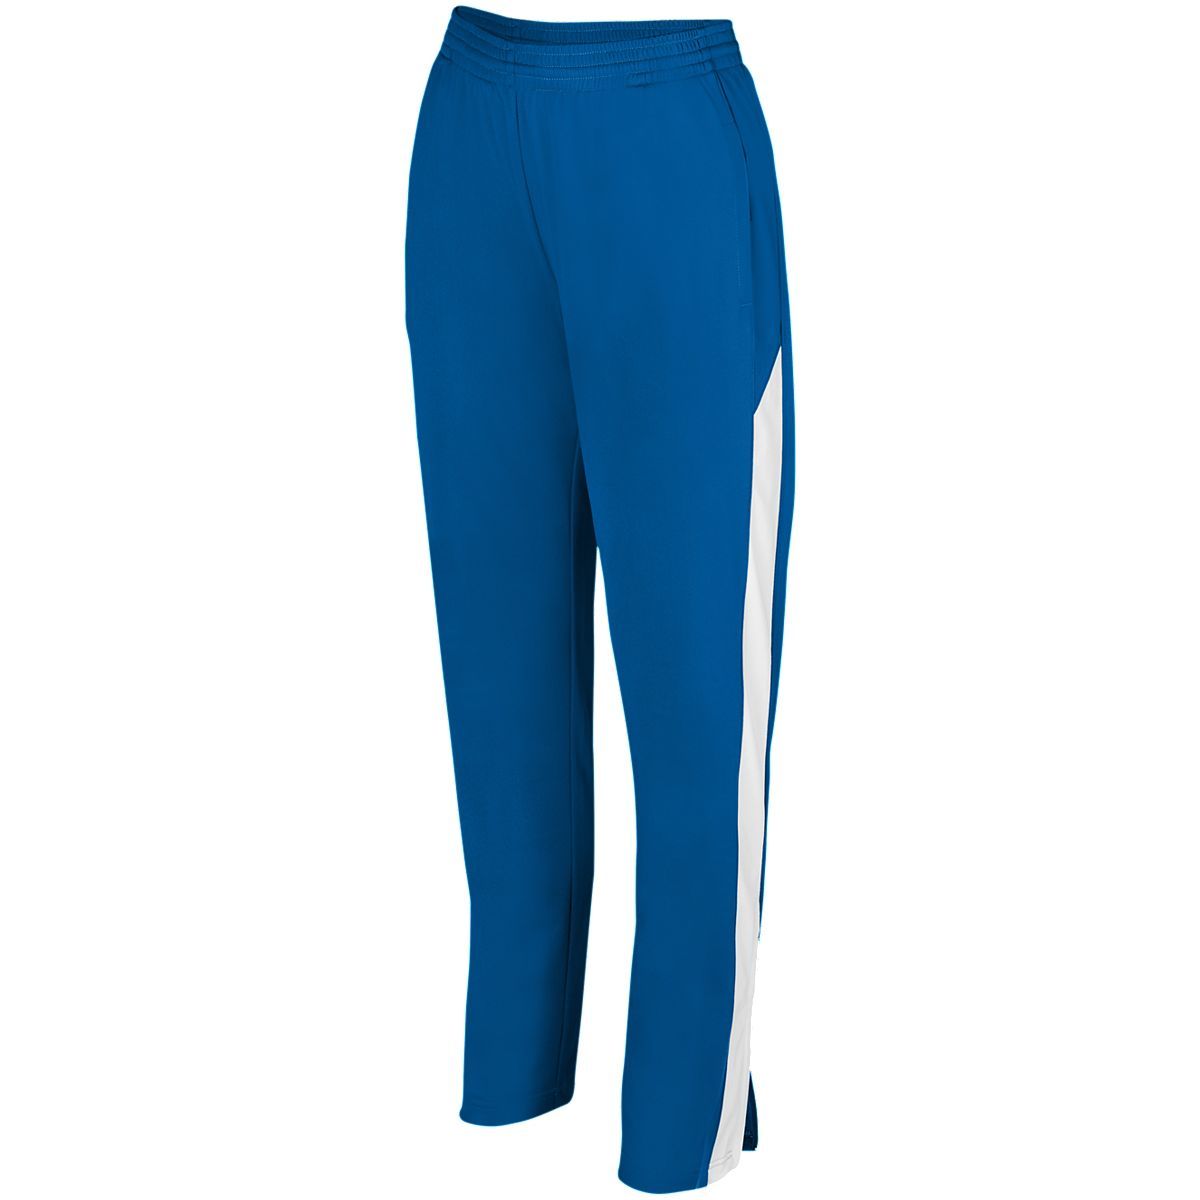 Augusta Sportswear Ladies Medalist Pant 2.0 in Royal/White  -Part of the Ladies, Ladies-Pants, Pants, Augusta-Products product lines at KanaleyCreations.com